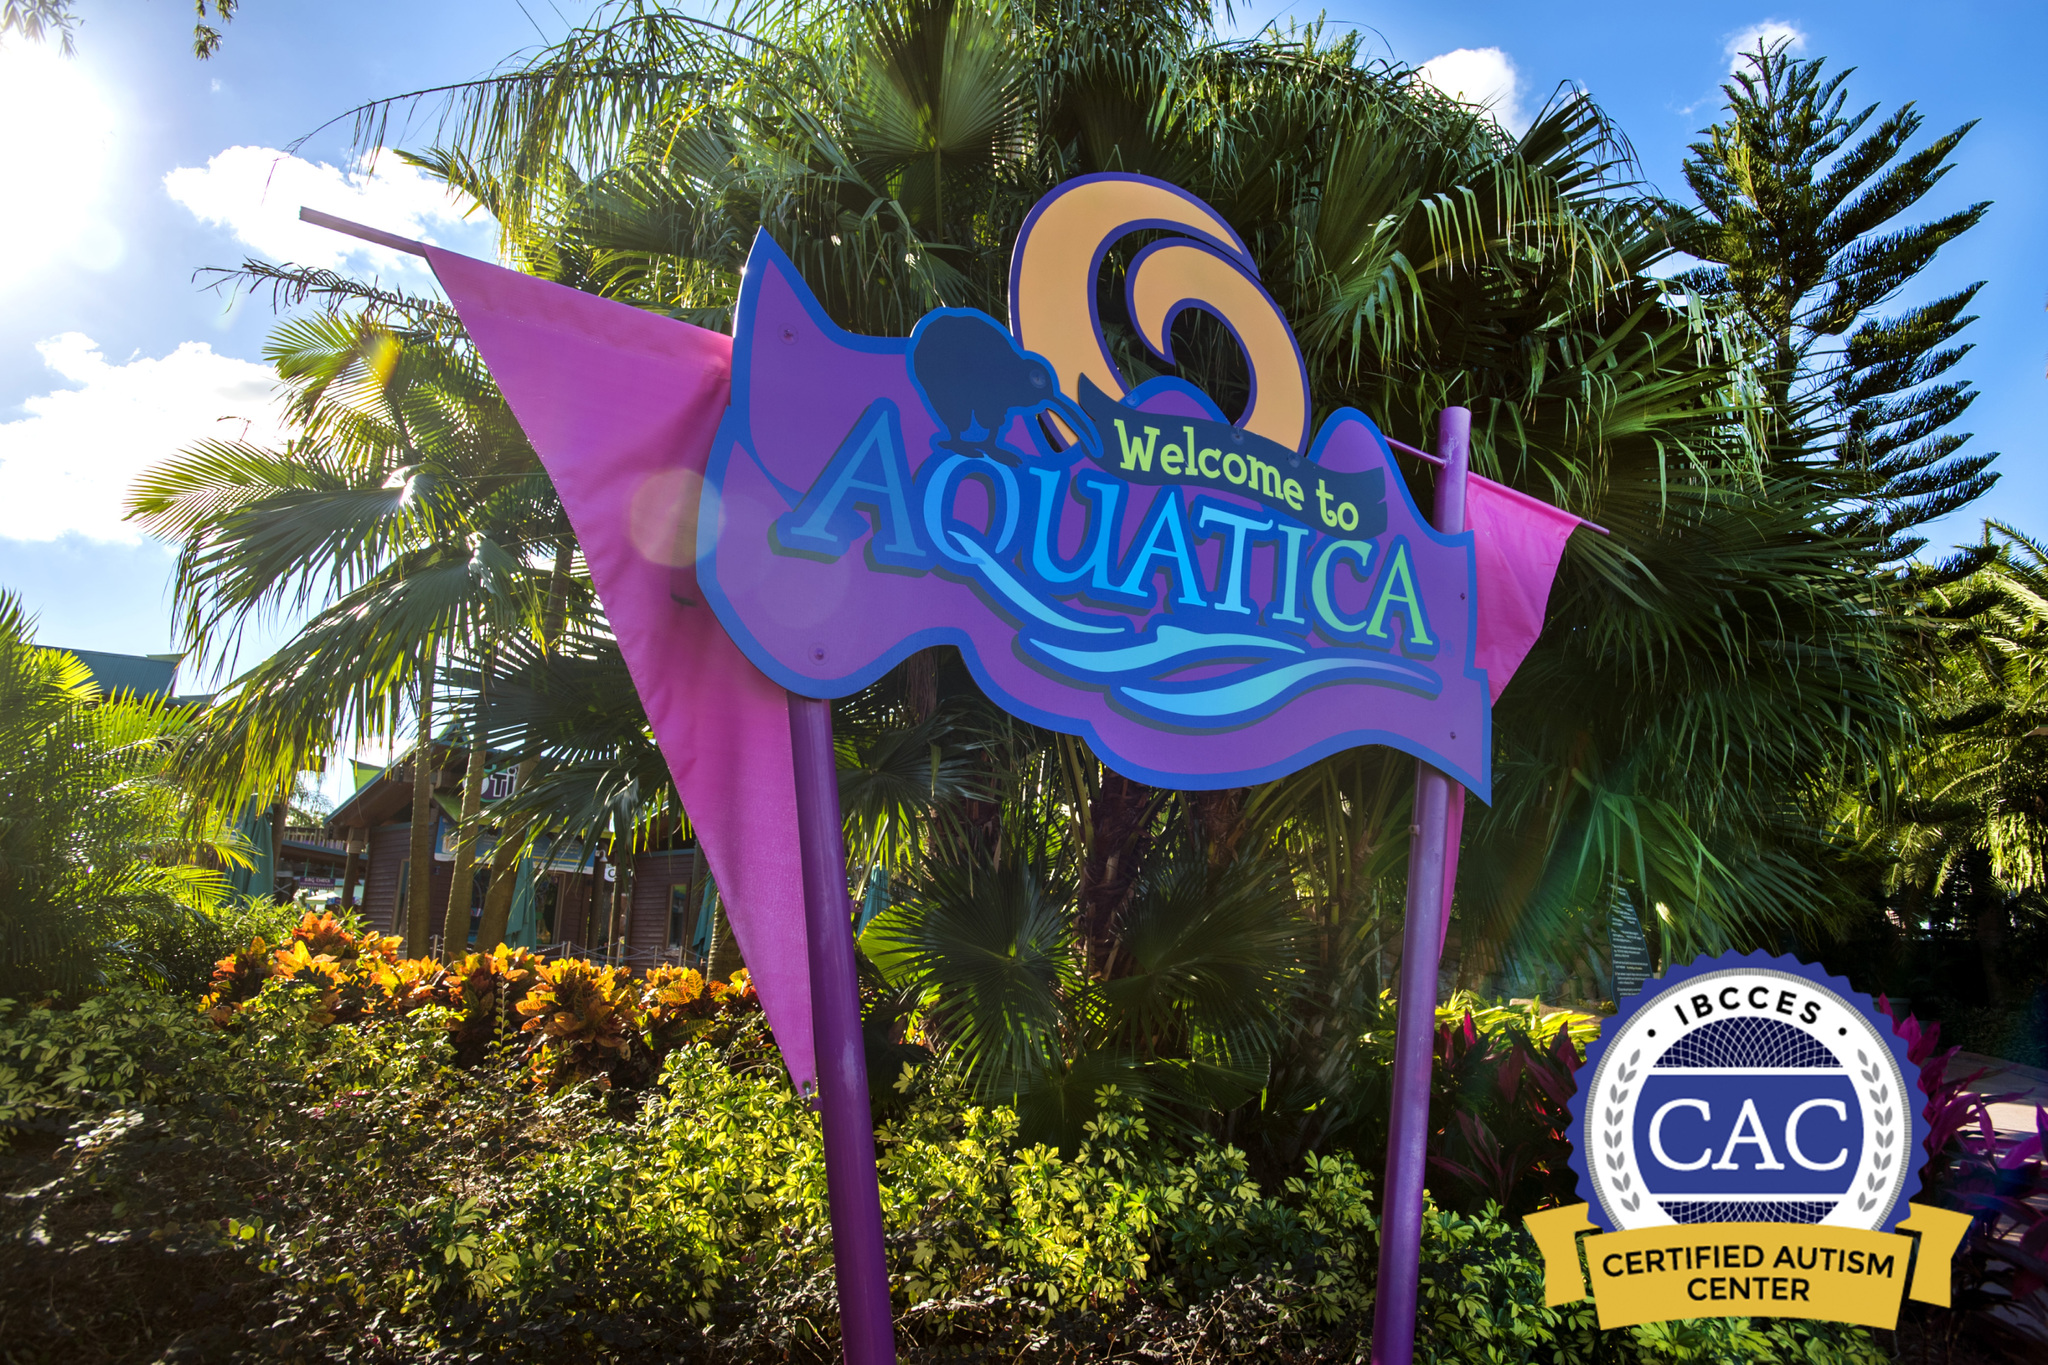 Aquatica Orlando: First Water Park in the World to be a Certified Autism Center